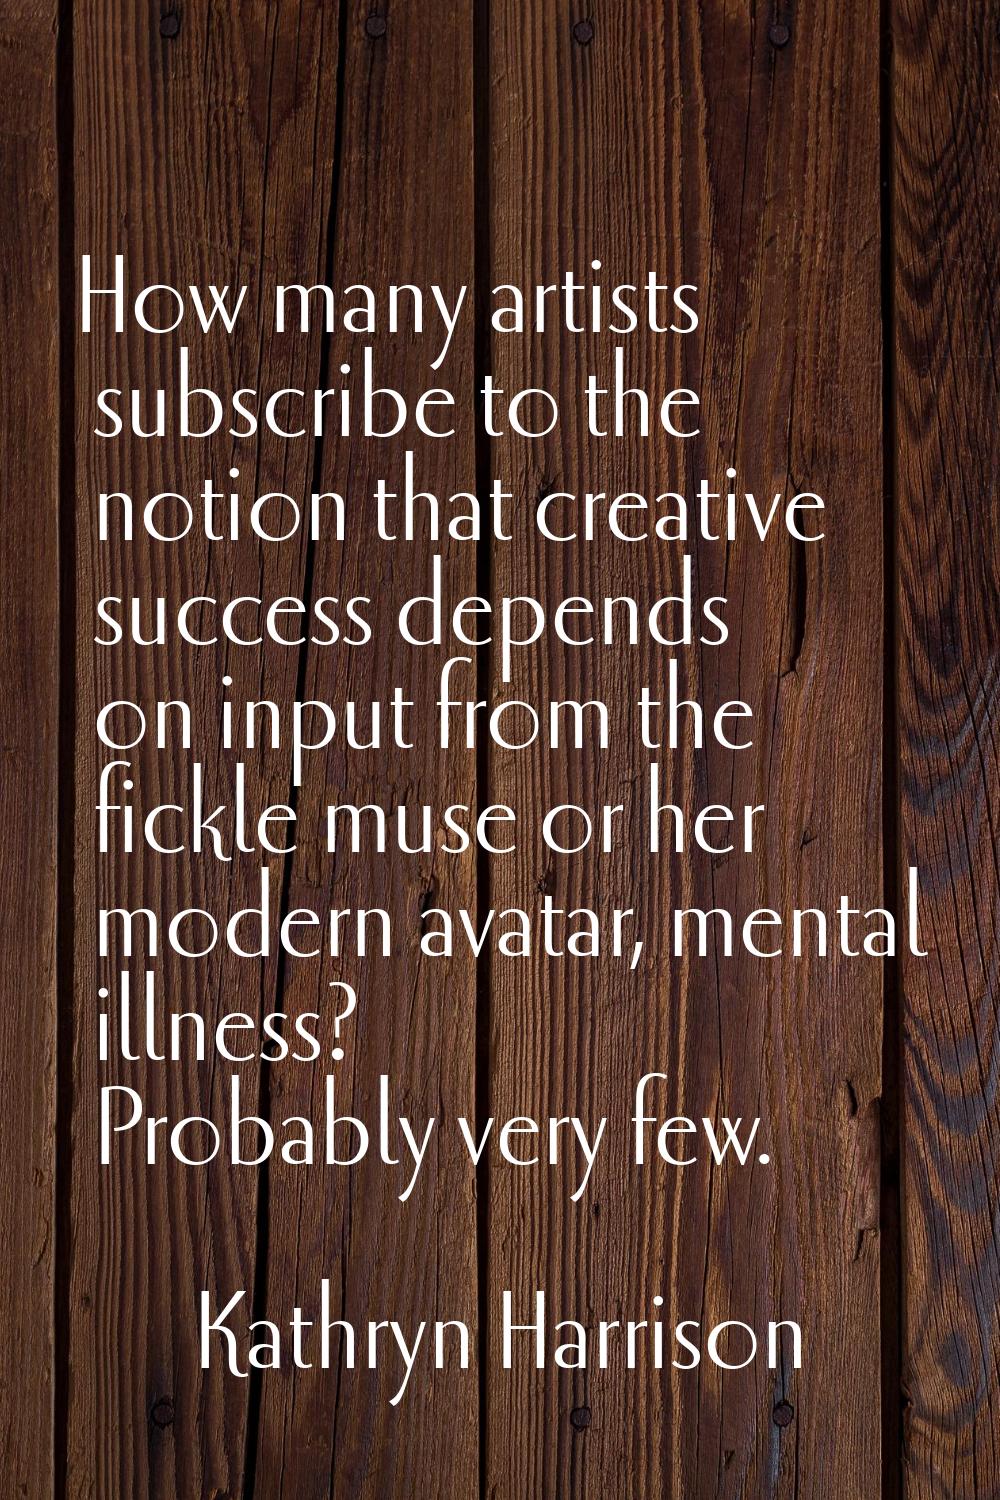 How many artists subscribe to the notion that creative success depends on input from the fickle mus